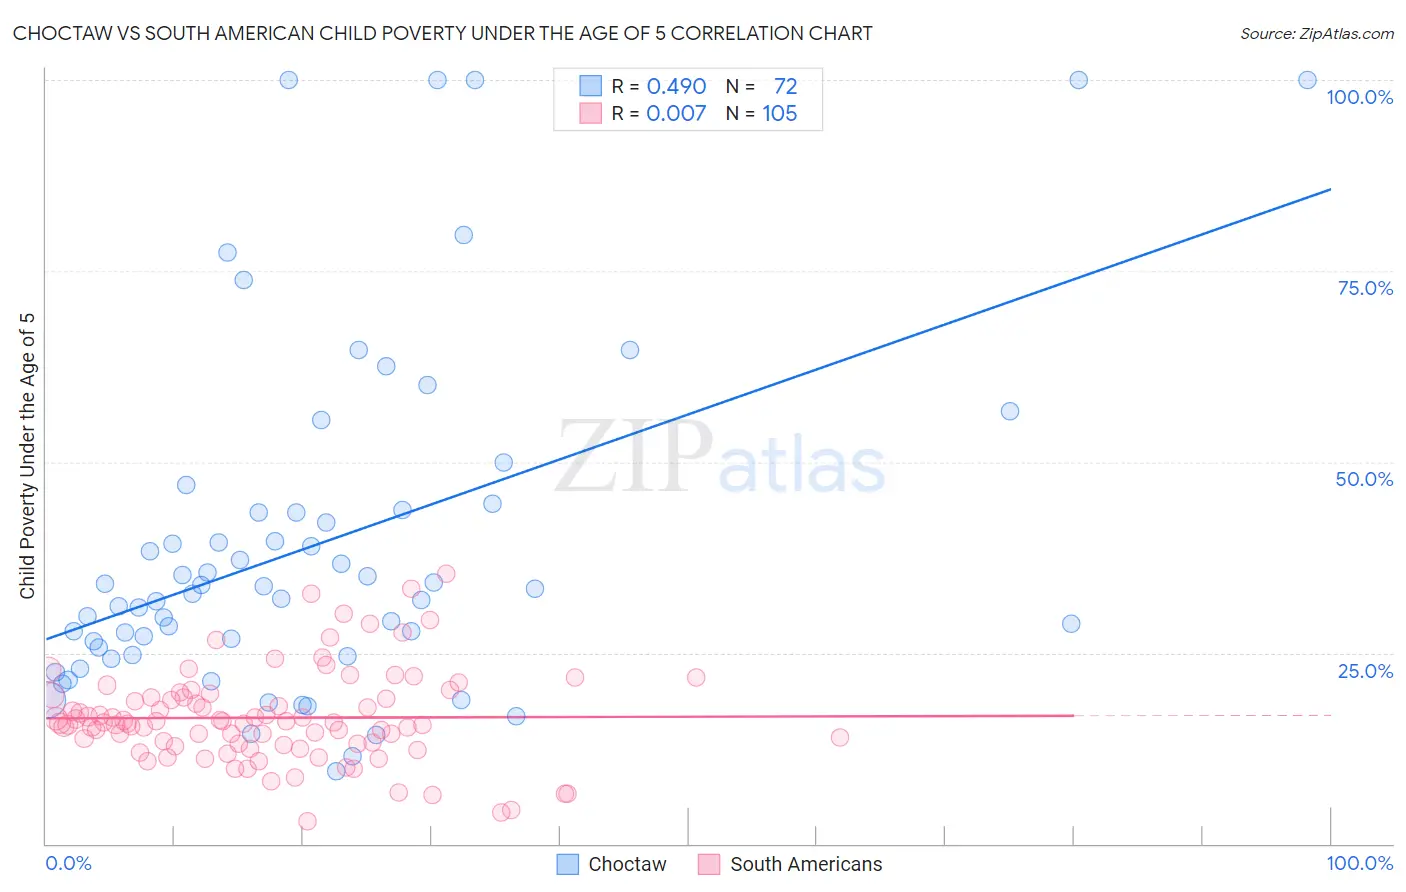 Choctaw vs South American Child Poverty Under the Age of 5